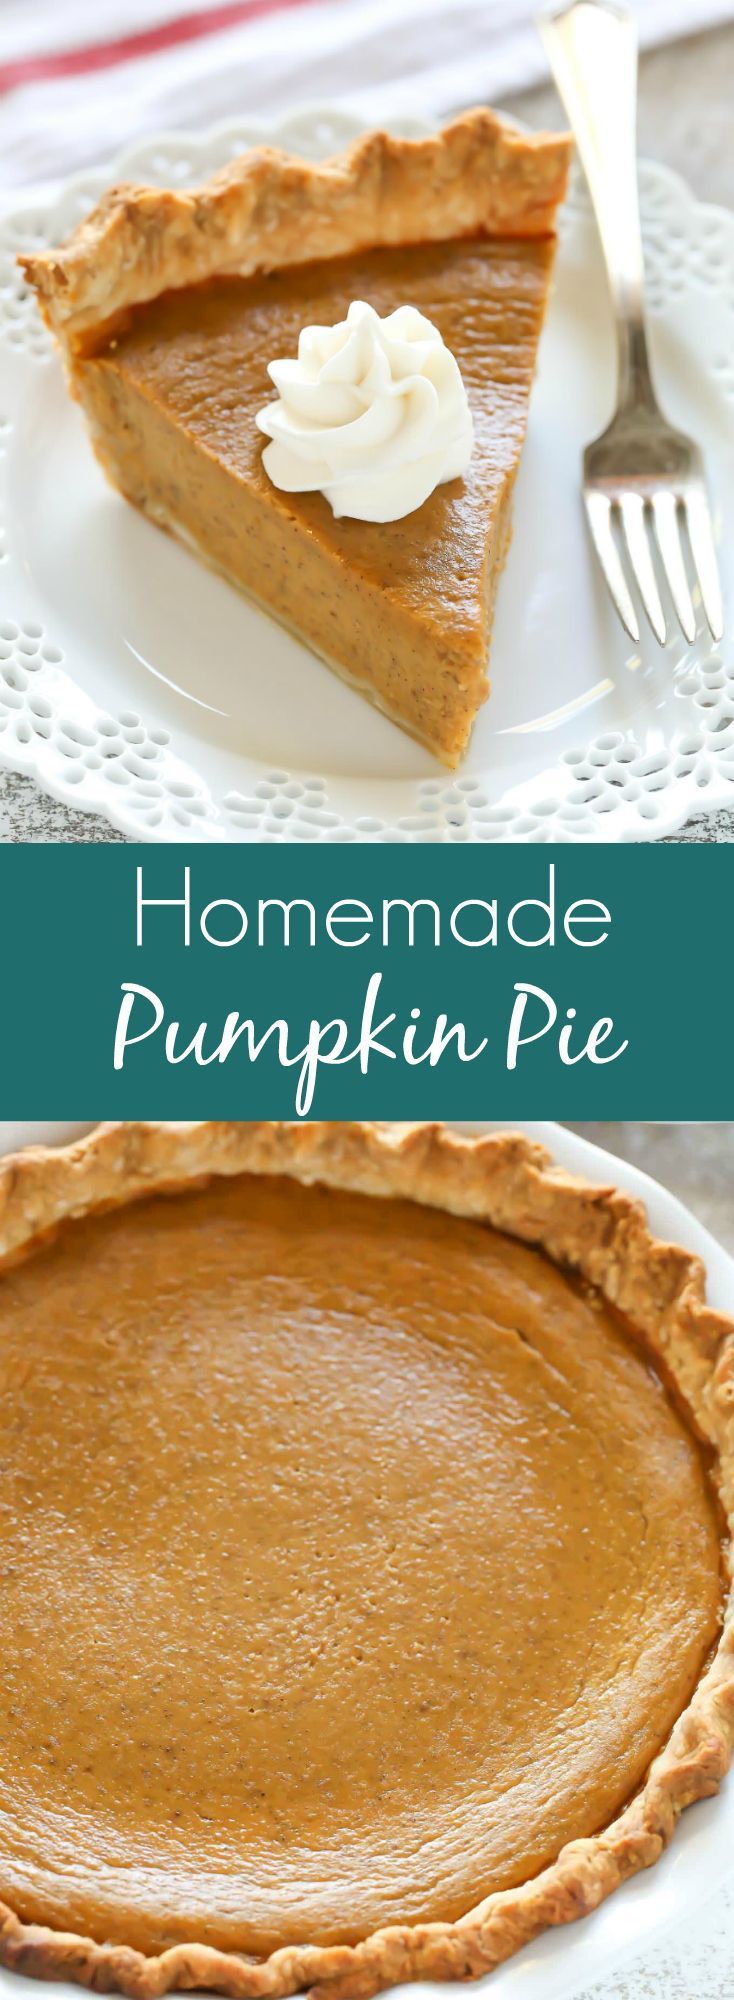 An easy and delicious recipe for Homemade Pumpkin Pie. This is the only pumpkin pie recipe you will ever need and it's perfect for the holidays! -   24 sweet pumpkin recipes
 ideas